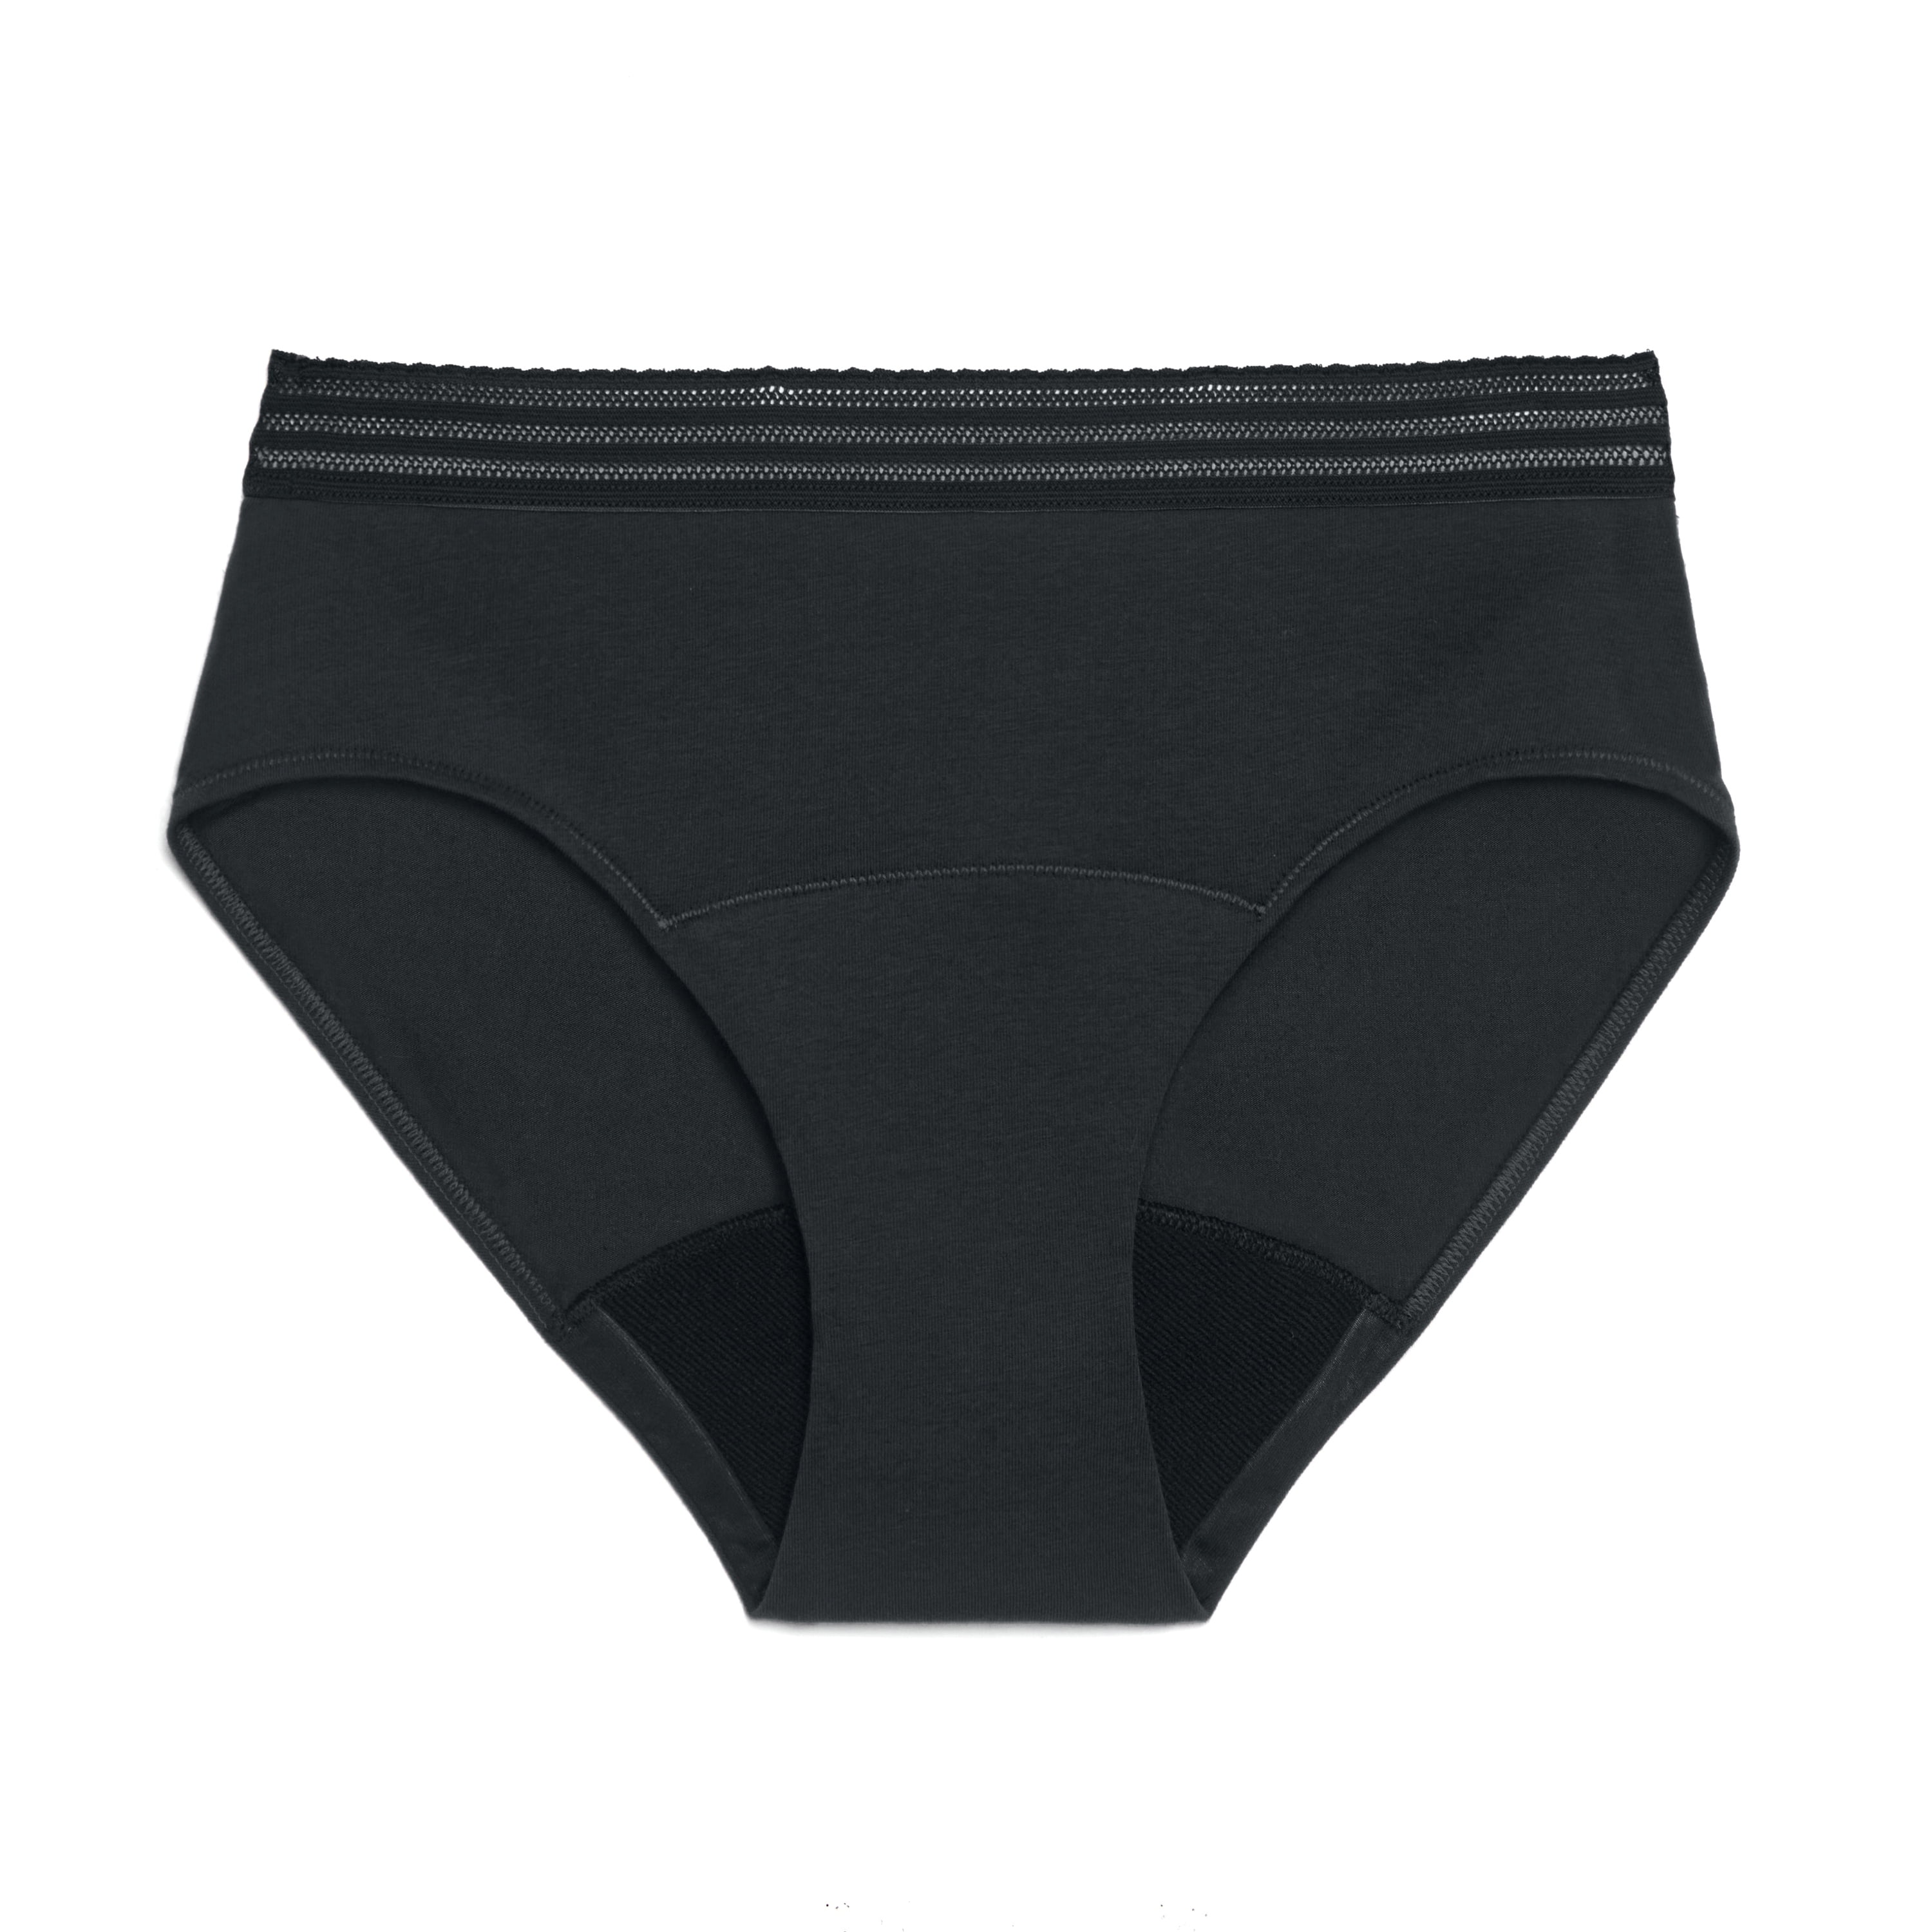 Thinx for All™ Women's Everyday Comfort Leakproof Period Underwear